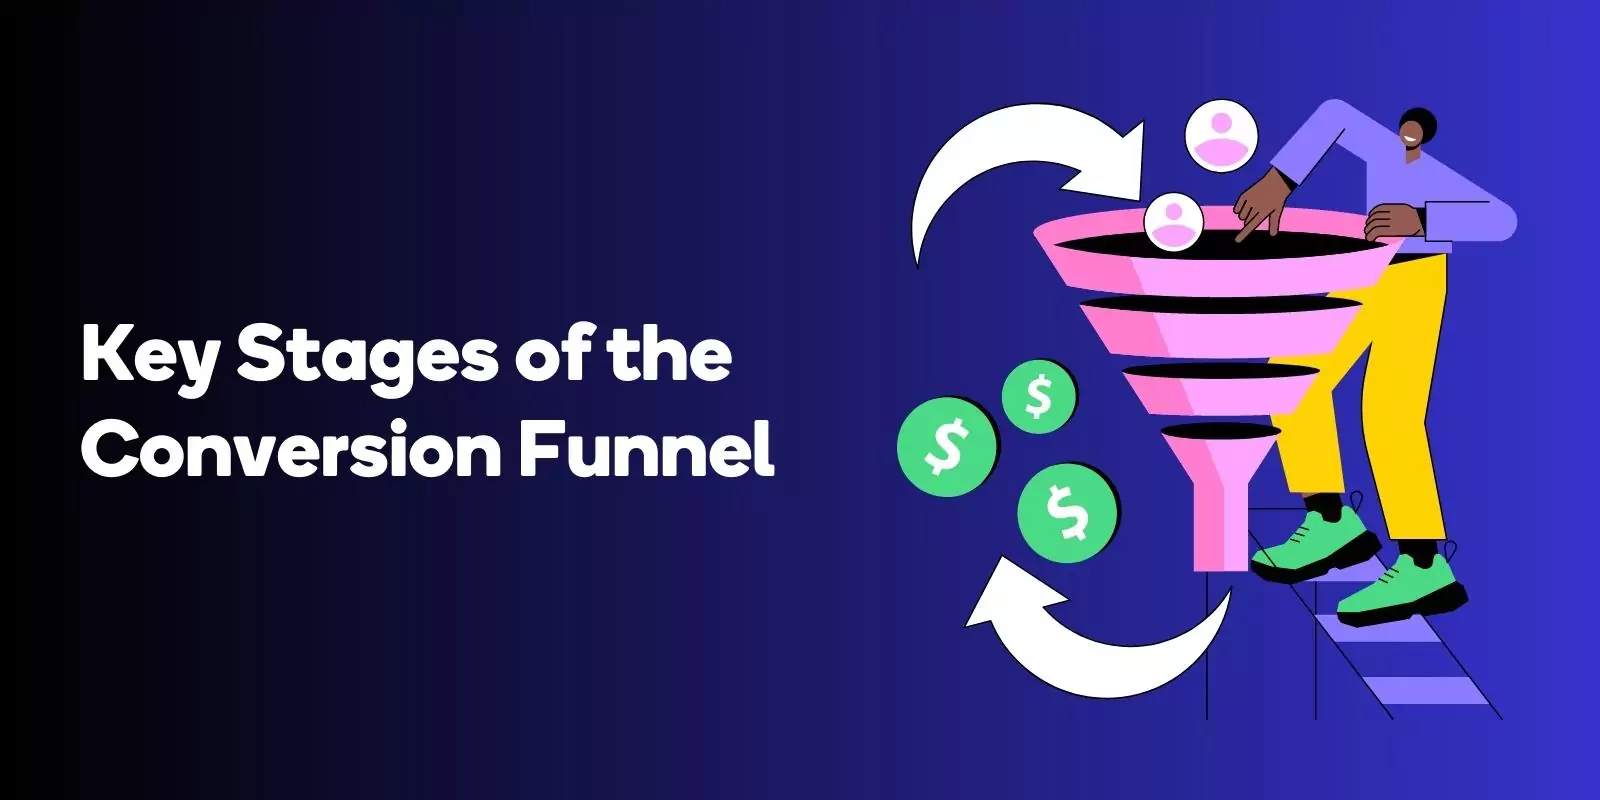 Key Stages of the Conversion Funnel